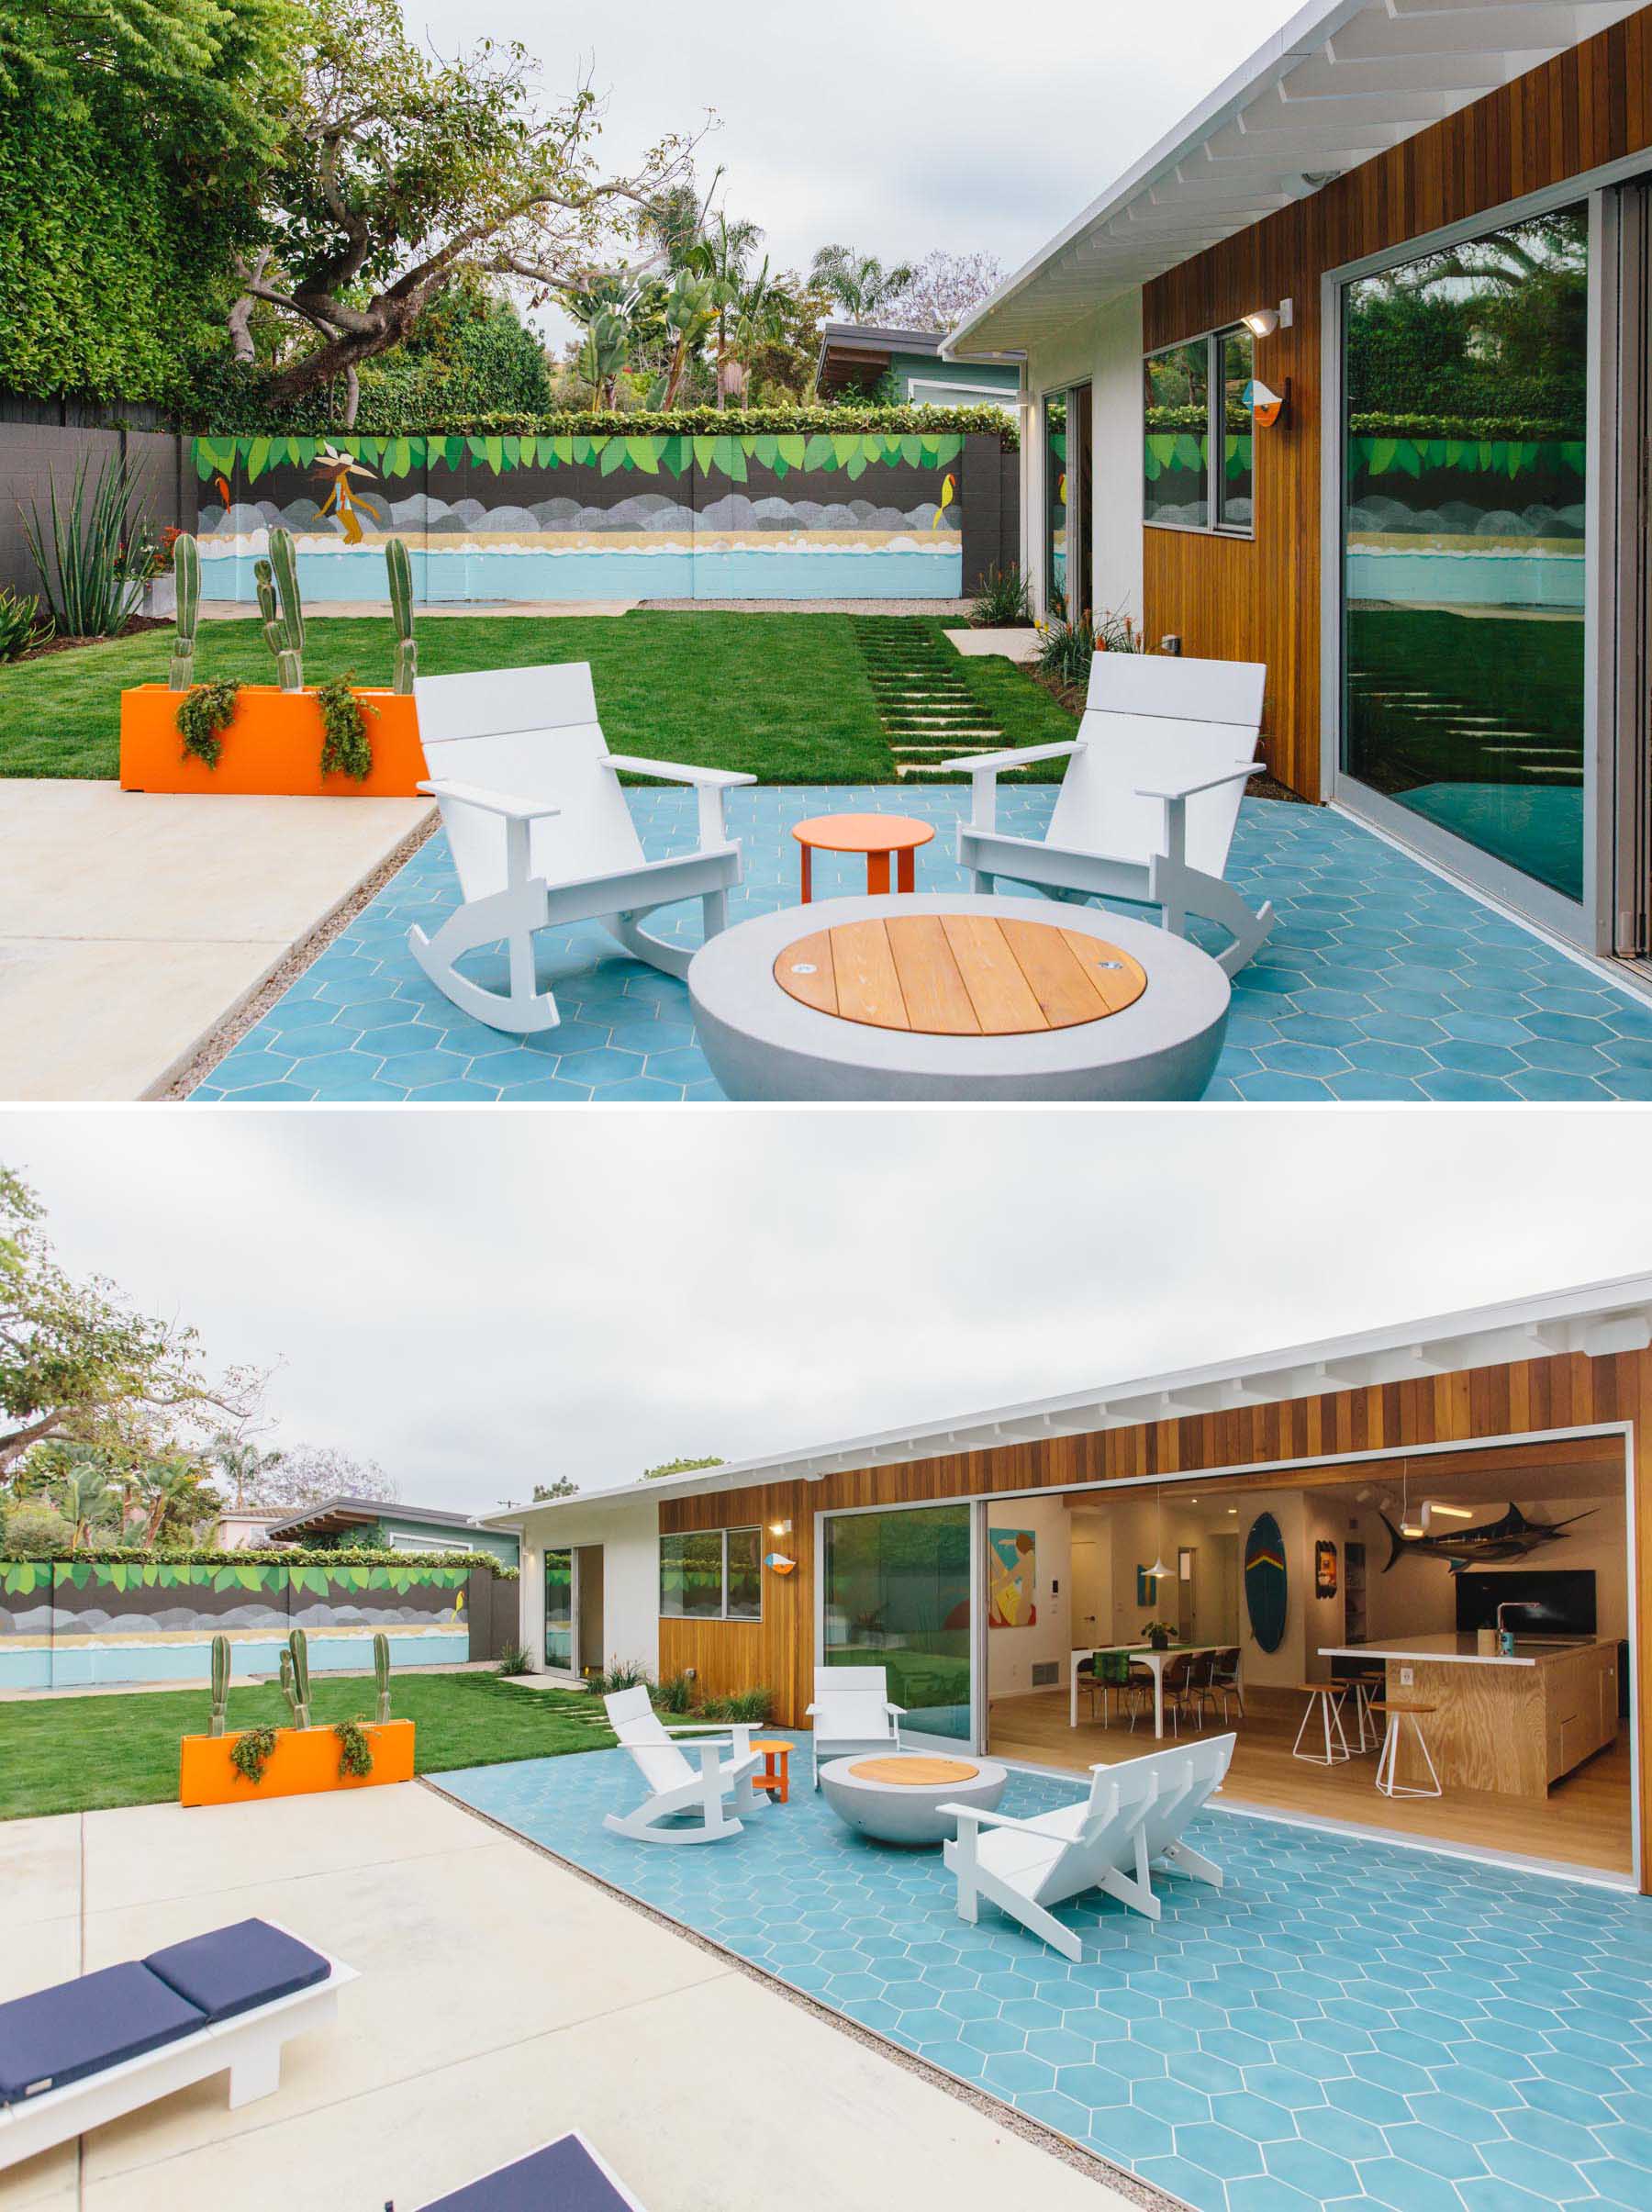 The new outdoor space includes an outdoor kitchen with built-in BBQ, a blue hexagonal tile patio, a fire bowl with lounge chairs, a colorful planter and artwork, and a grassy yard. Due to California state drought conditions, landscaping mandated low mow/drought tolerant grass, succulents, and cacti.